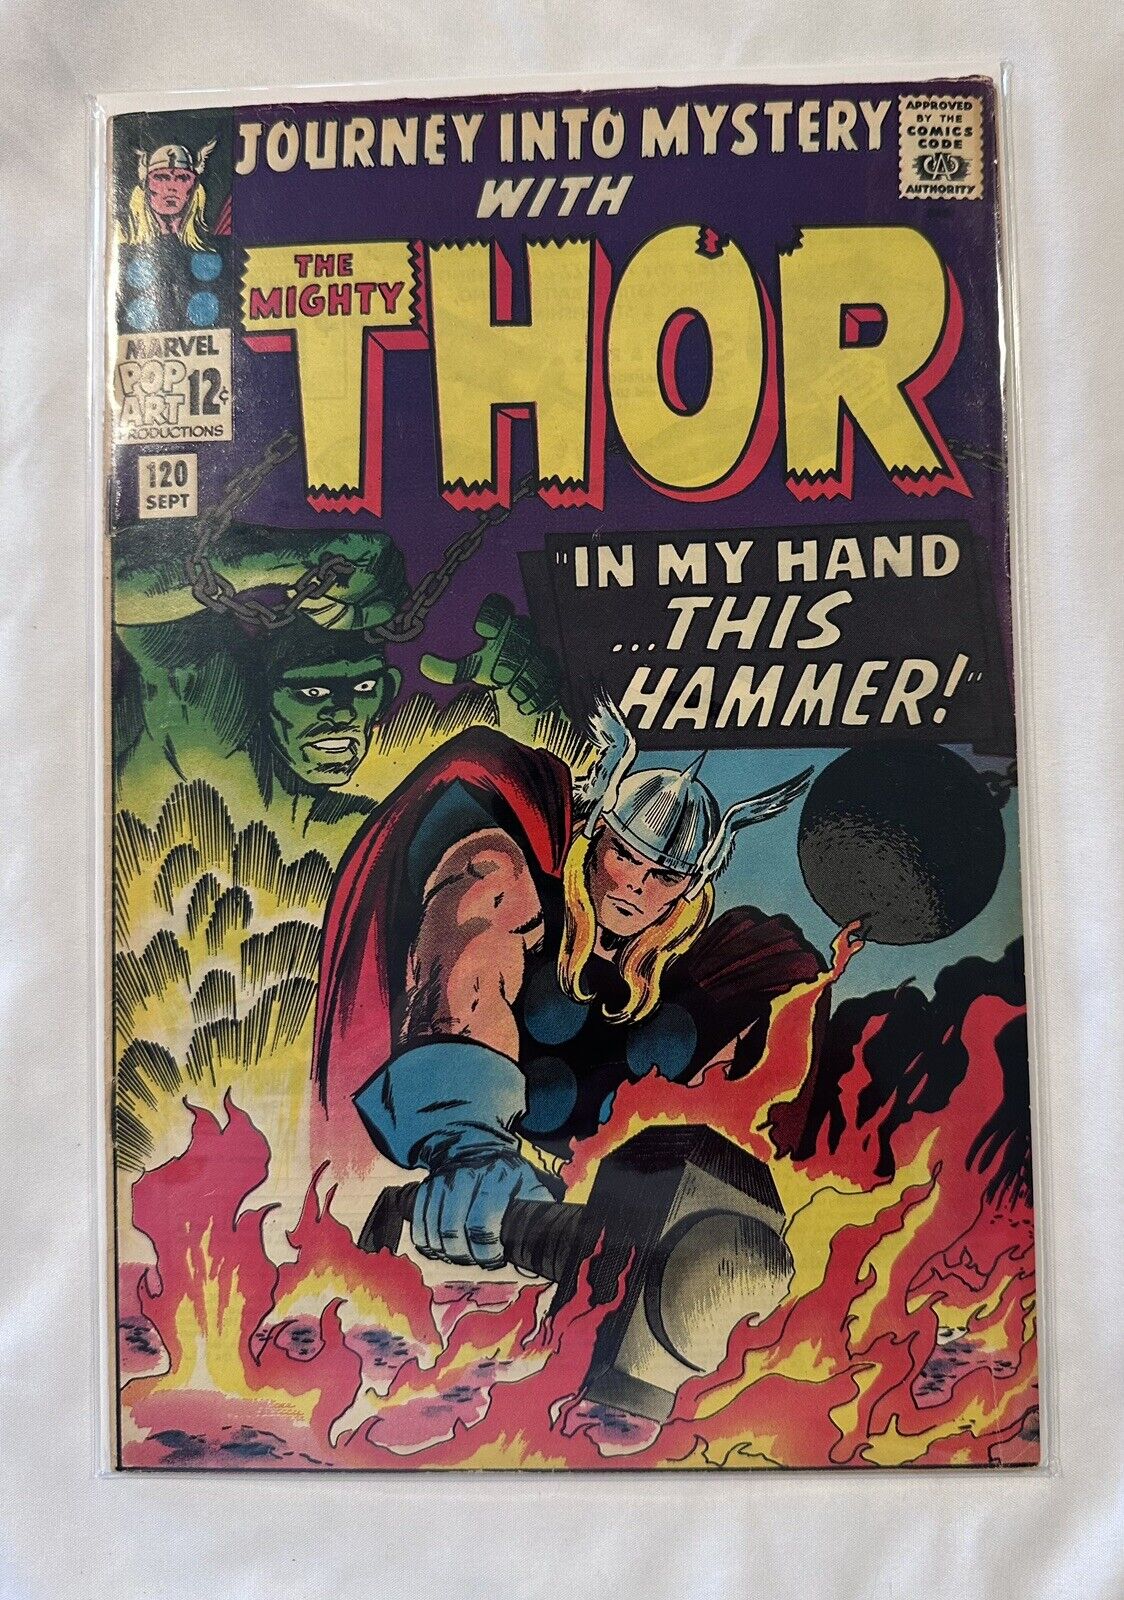 Journey Into Mystery Thor  #120  “In My Hand This Hammer”